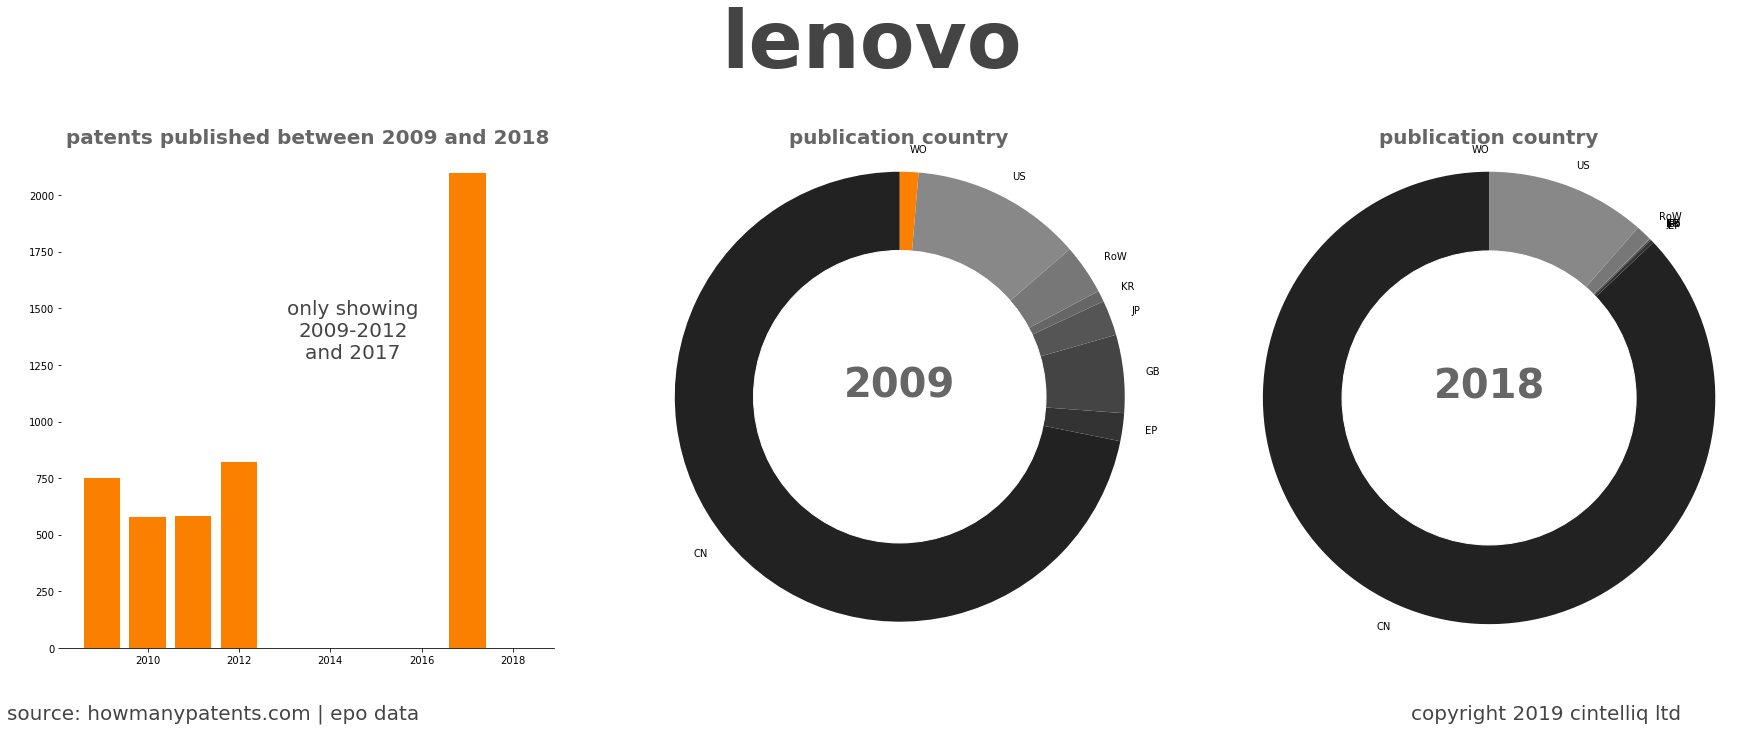 summary of patents for Lenovo